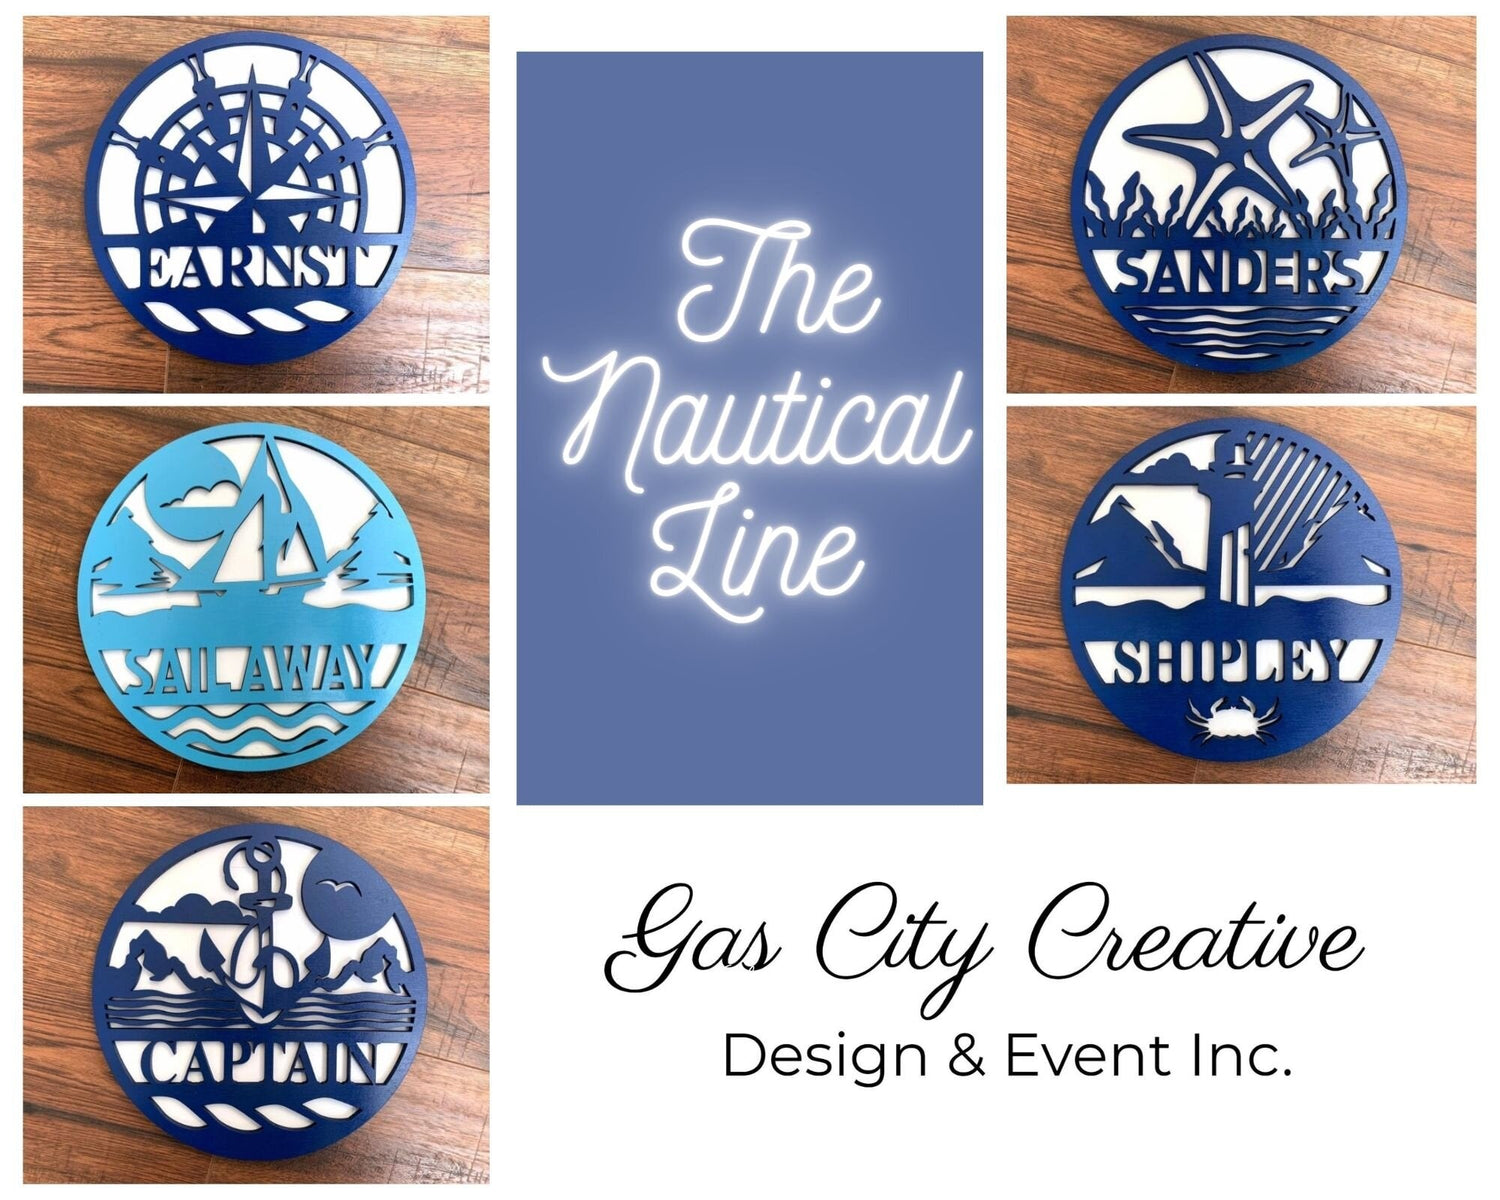 Aspin Nautical Round Set with or without backer - Gas City Creative Design & Event https://www.facebook.com/gascitycreative/